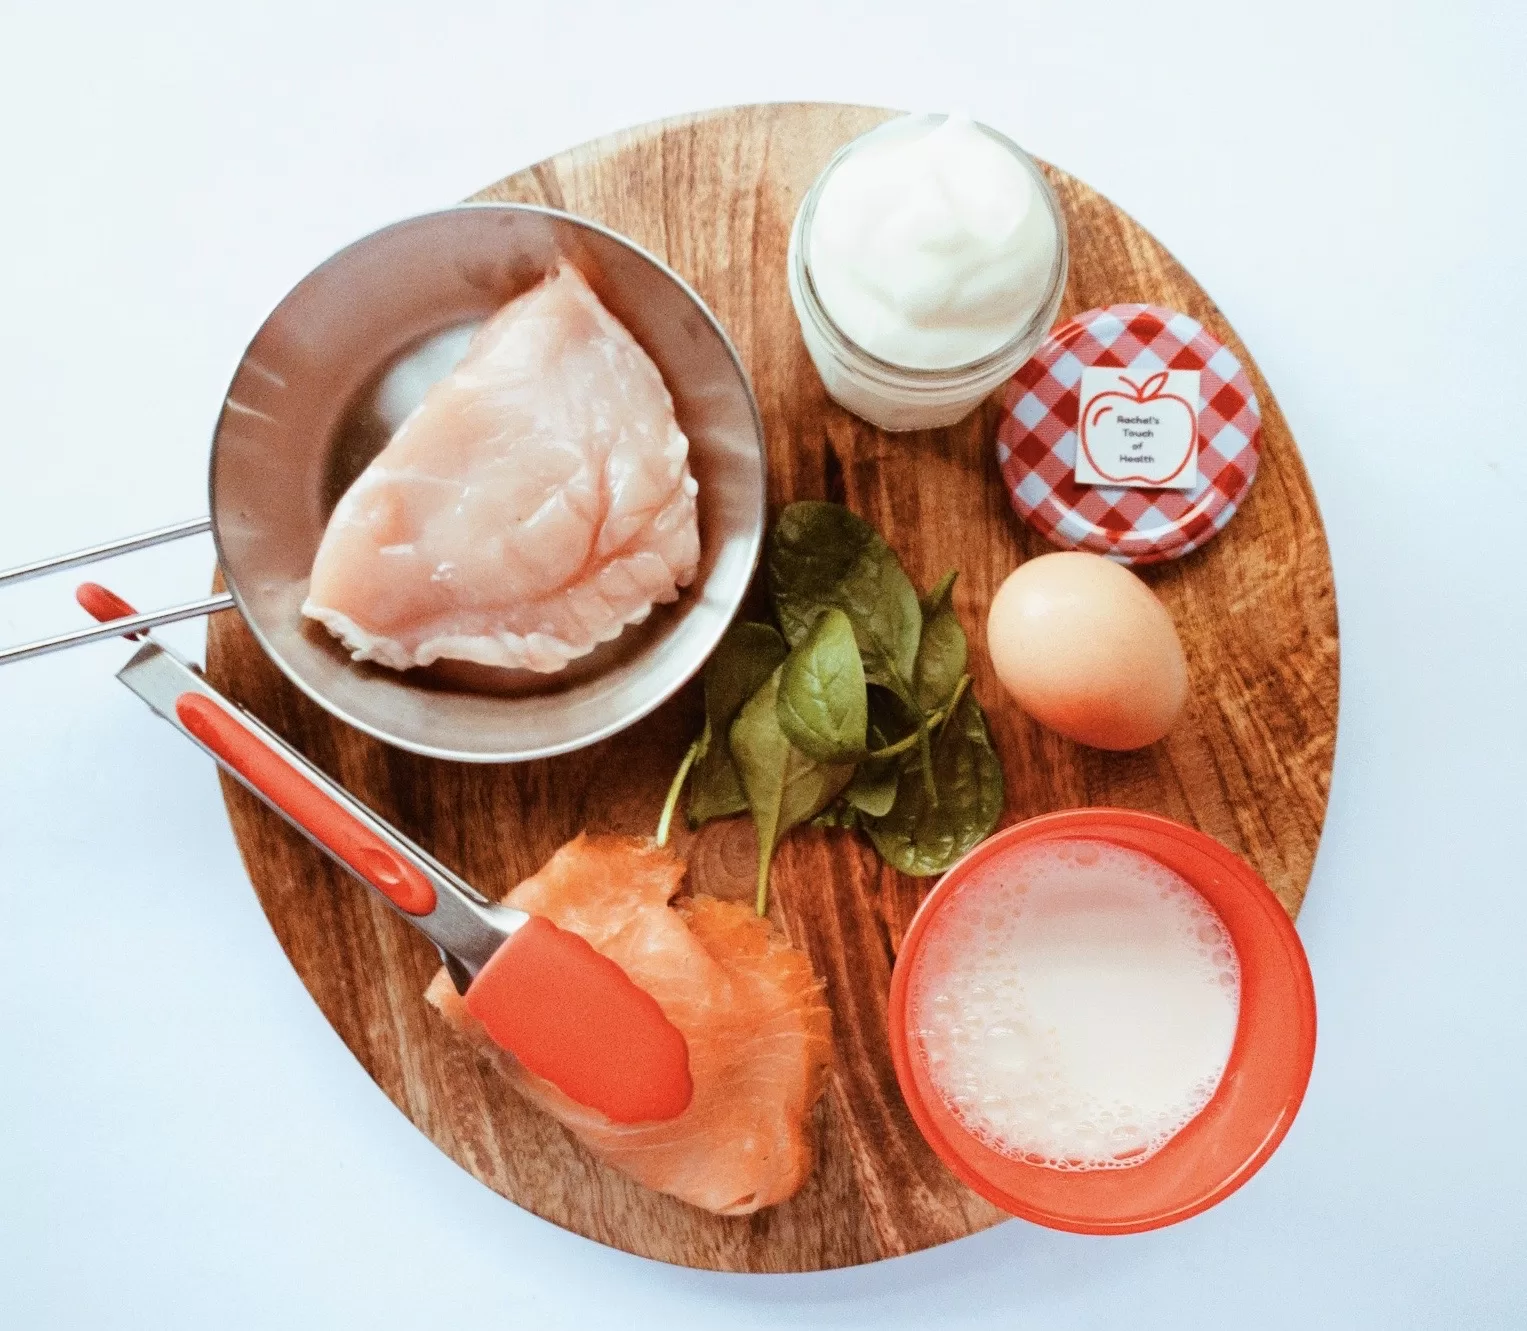 A photo featuring an array of diverse protein sources, including lean meats, fish, eggs, yoghurt, and spinach, symbolising the variety offered in a once-off customised weight loss meal plan.